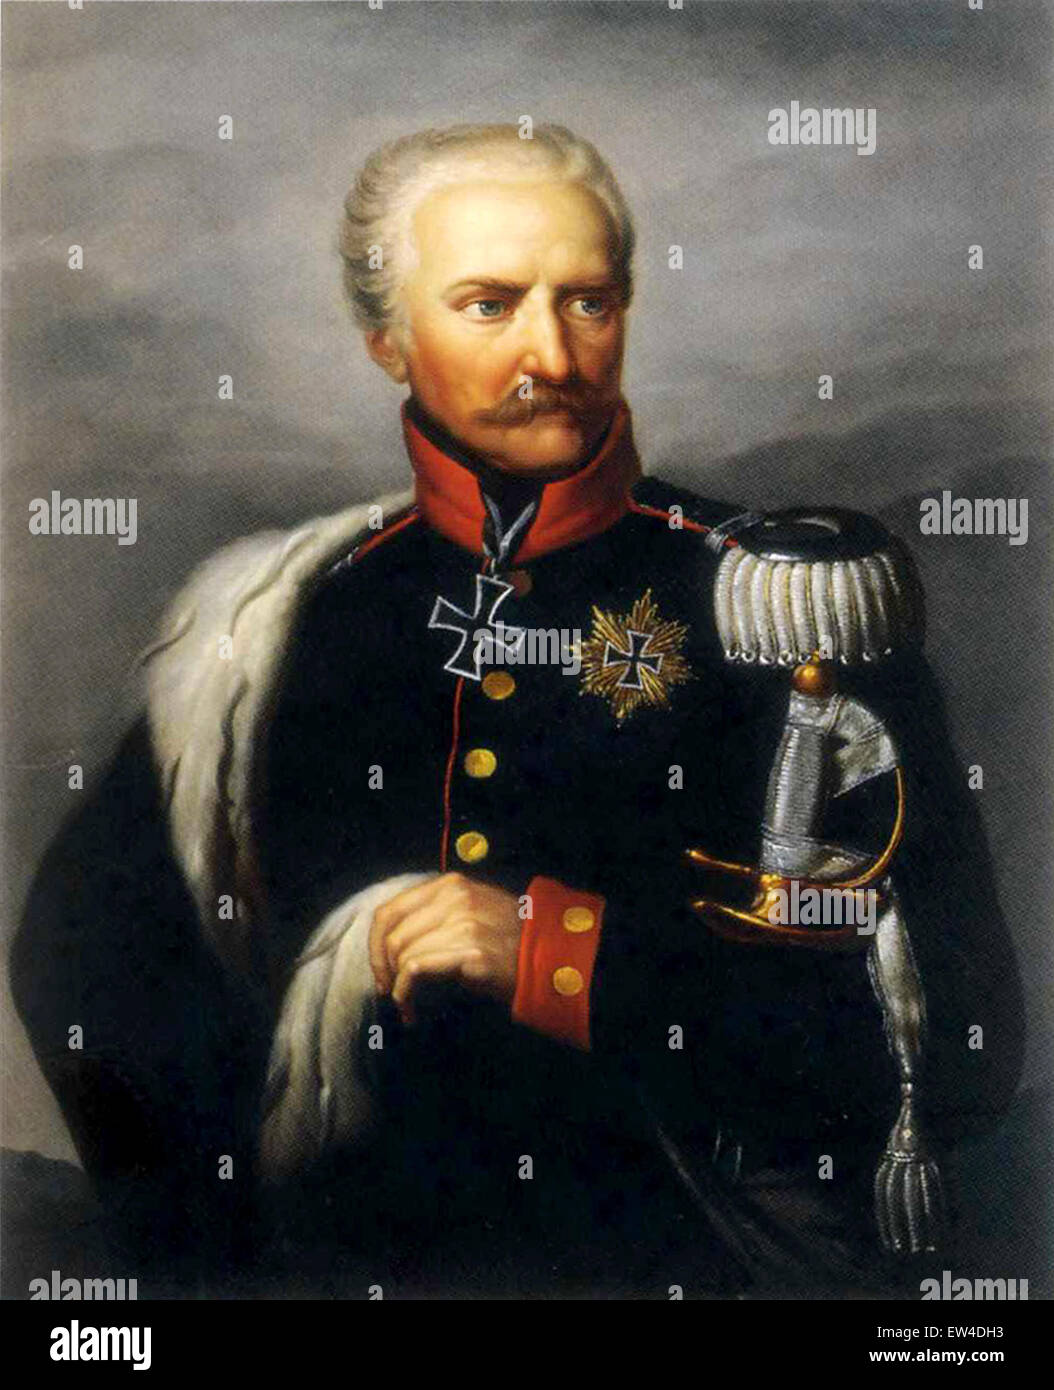 Gebhard Leberecht von Blücher, who had led one of the coalition armies defeating Napoleon at the Battle of Leipzig, commanded the Prussian army Stock Photo